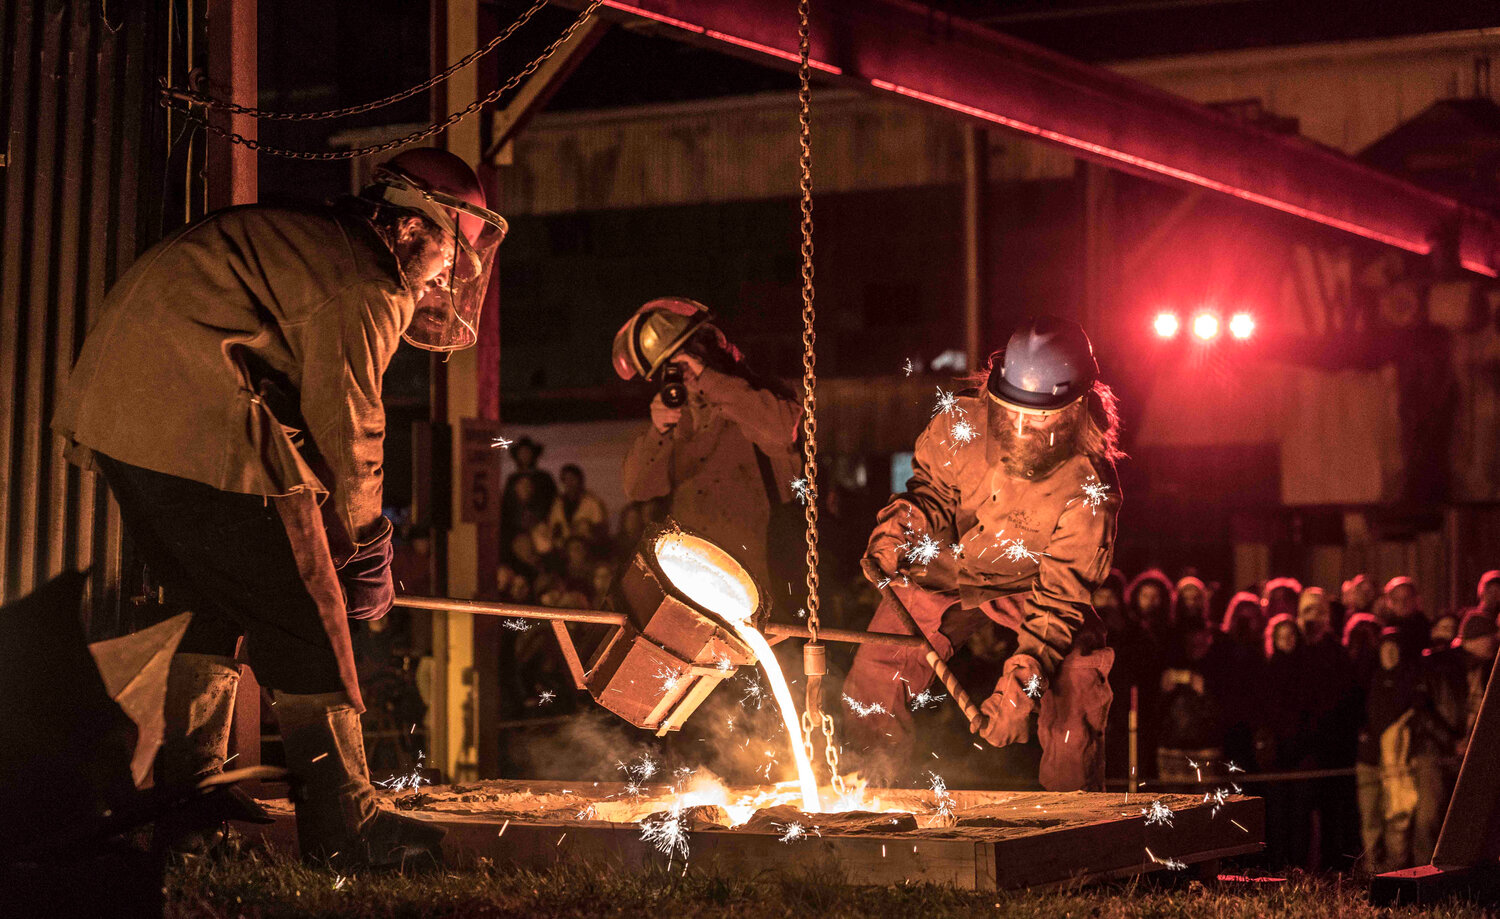 The rescheduled Iron Pour promises a fiery spectacle at The Steel Yard